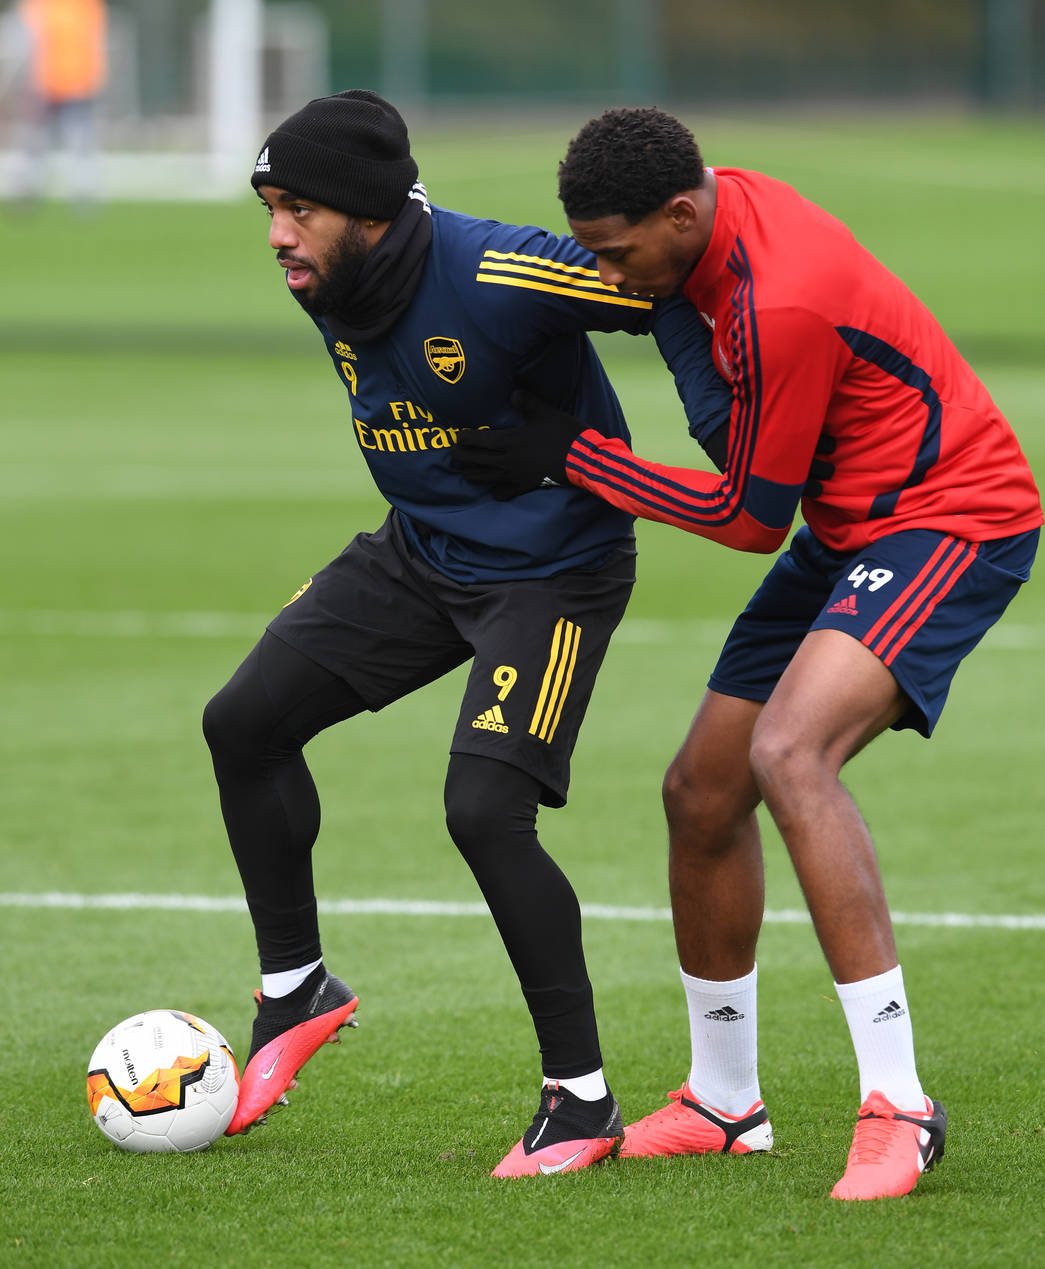 ST ALBANS, ENGLAND - FEBRUARY 26: Zech Medley of Arsenal during the Arsenal 1st Team Training Session at London Colney on February 26, 2020, in St Albans, England. (Photo by David Price/Arsenal FC via Getty Images)